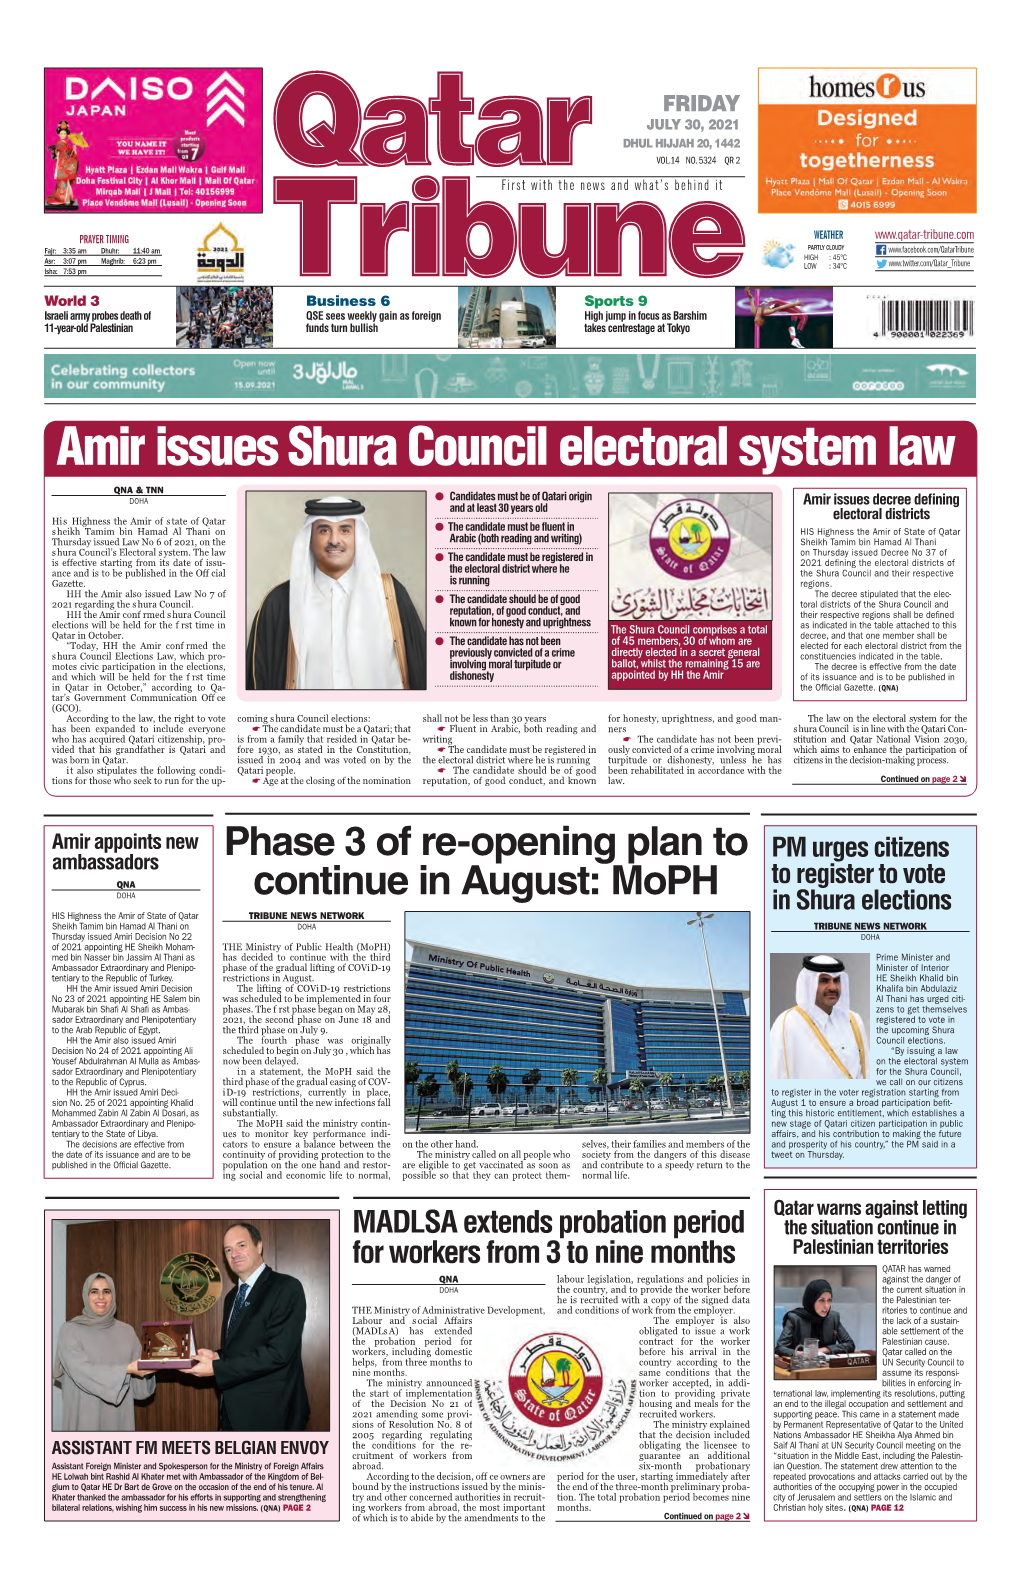 Amir Issues Shura Council Electoral System Law